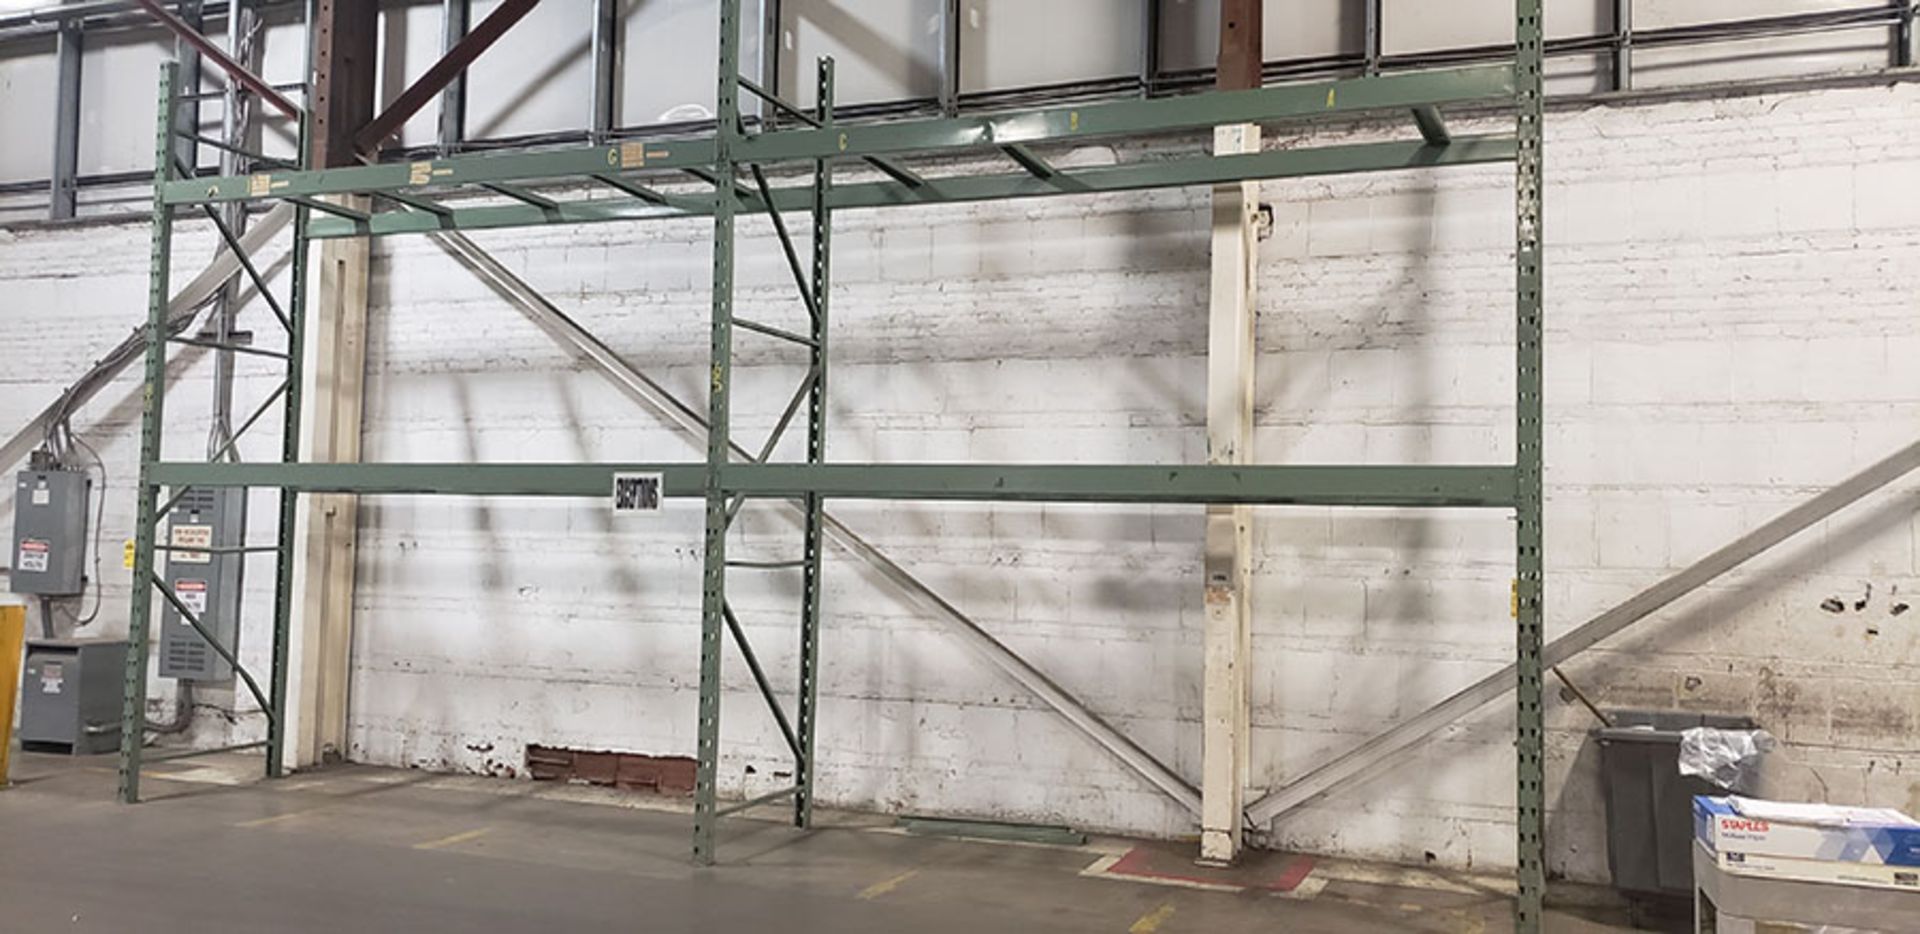 (2) SECTIONS OF TEARDROP STYLE PALLET RACK; (3) 14' X 42'' UPRIGHTS, (8) 12' X 5'' CROSSBEAMS